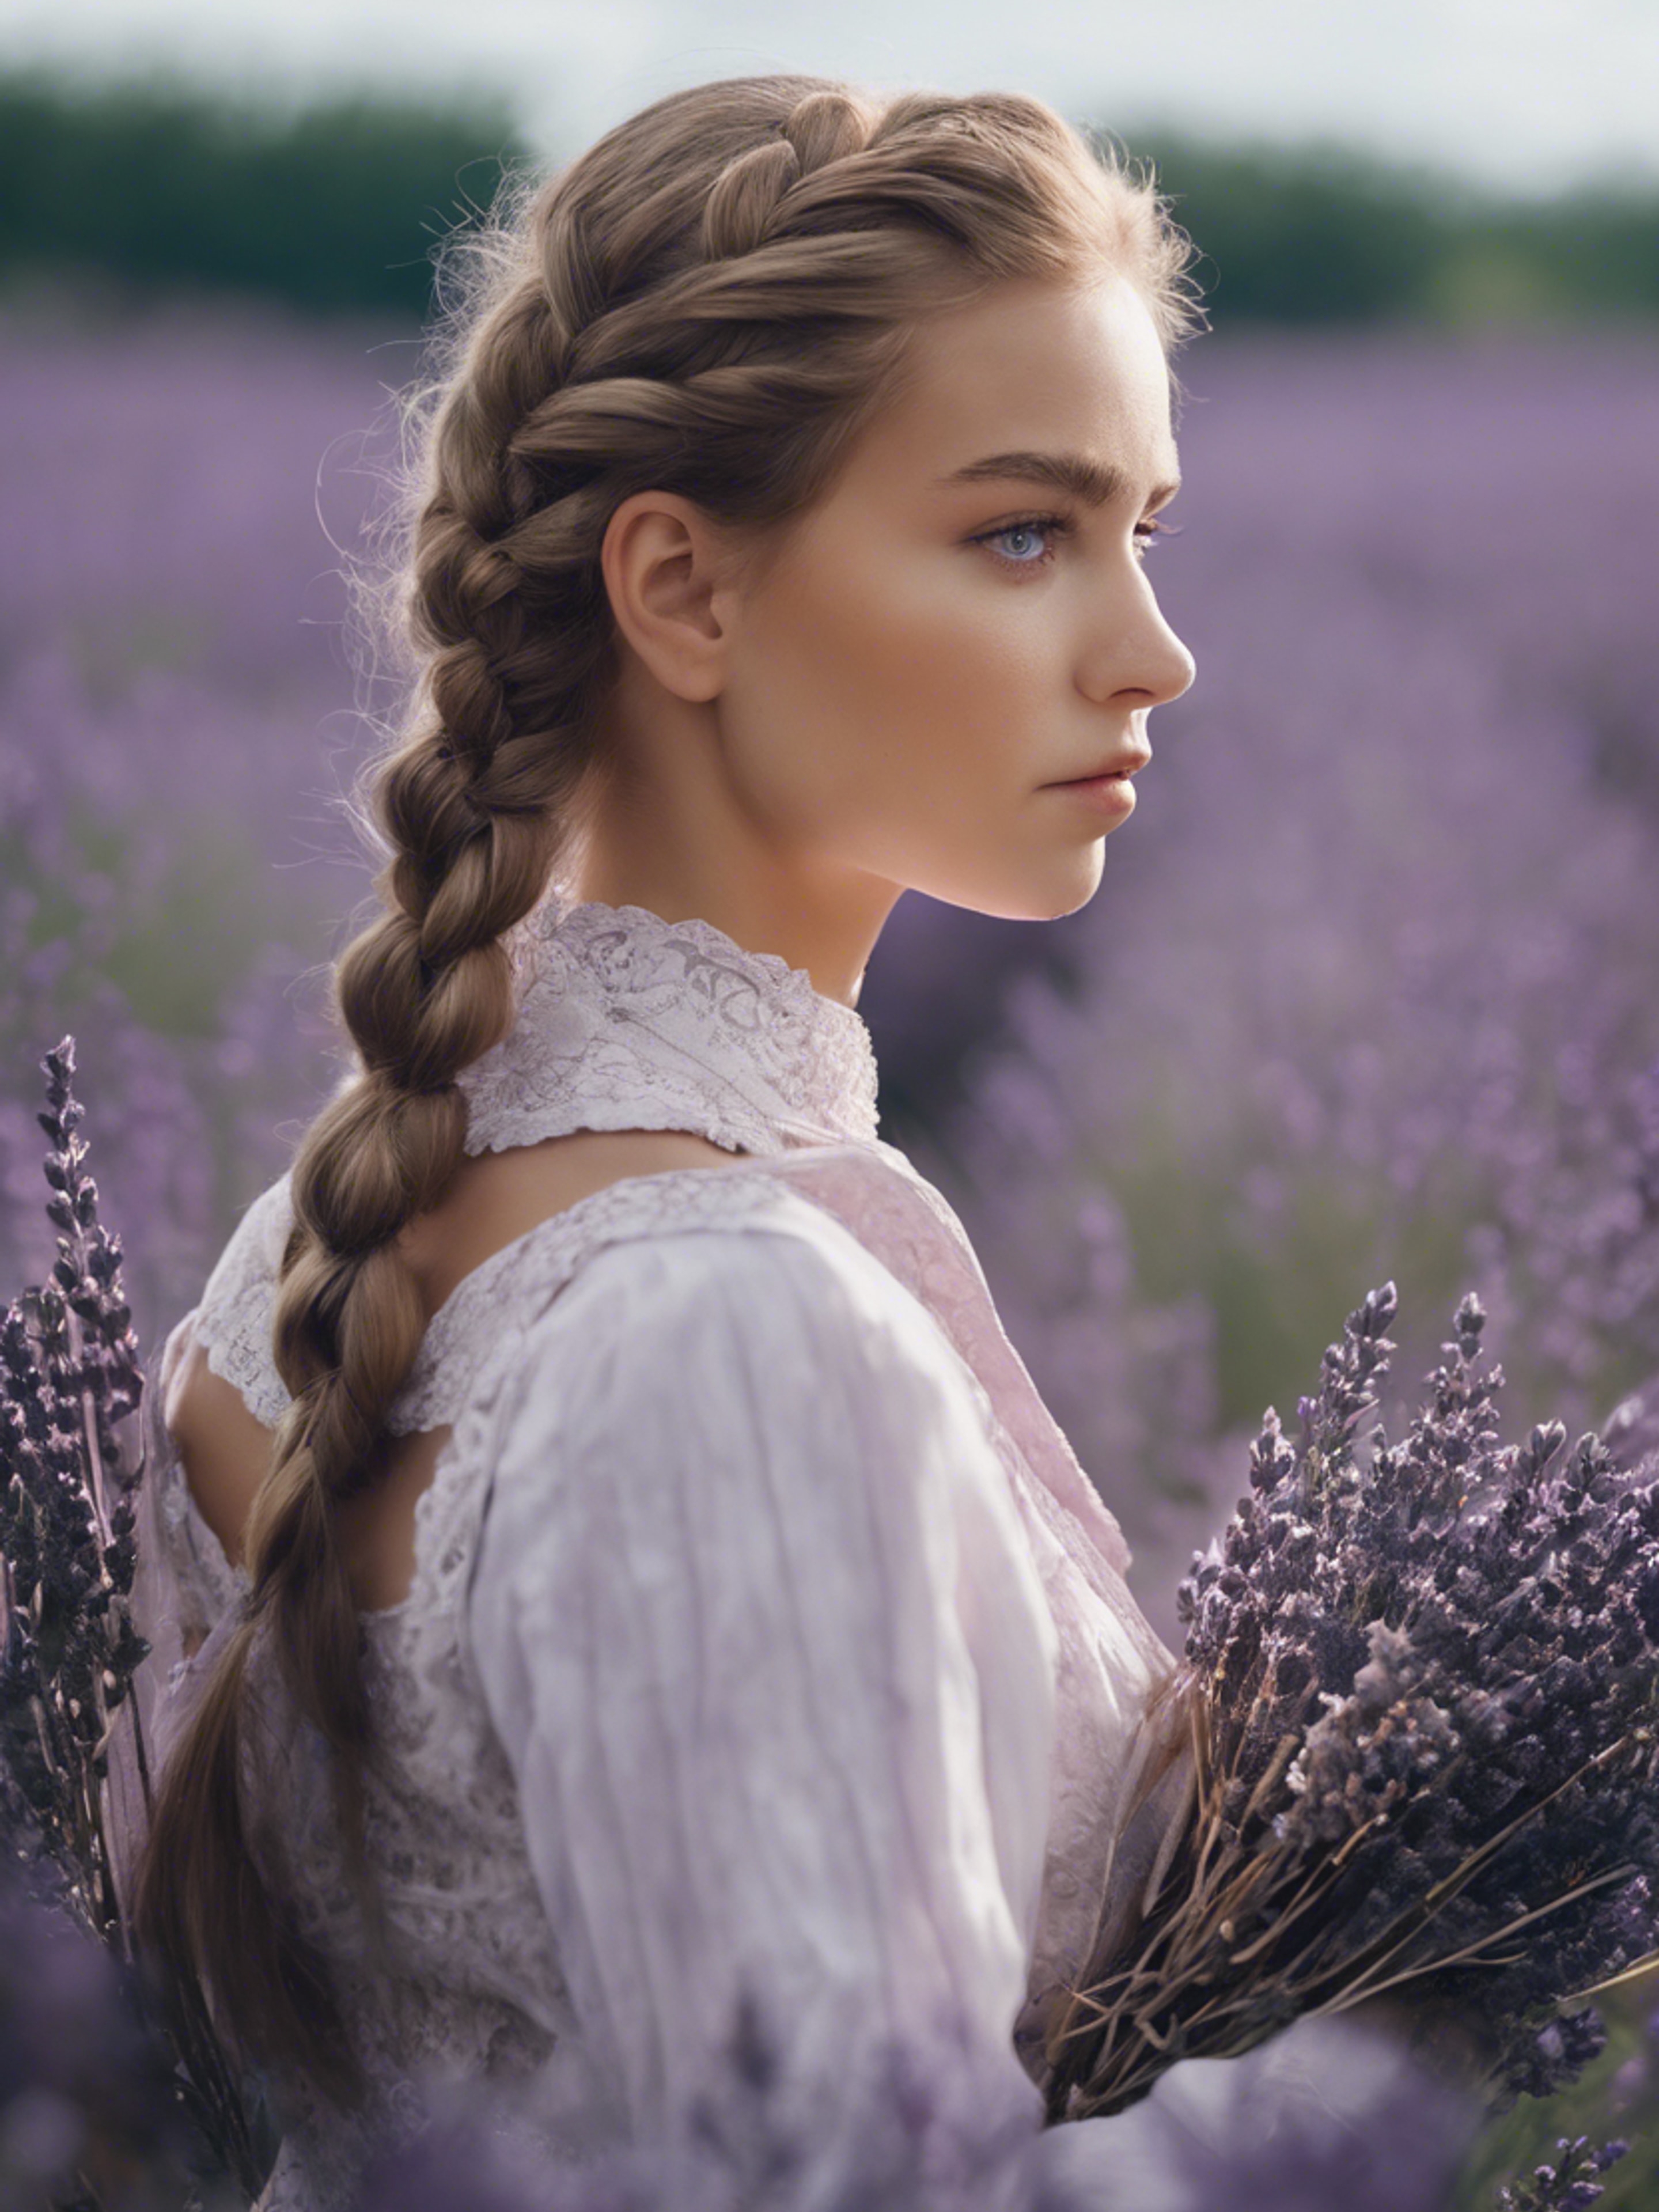 A pretty, light-eyed girl with her hair done in classic French braid, surrounded by a field of French lavender. Wallpaper[c71d23e36c7041a09435]